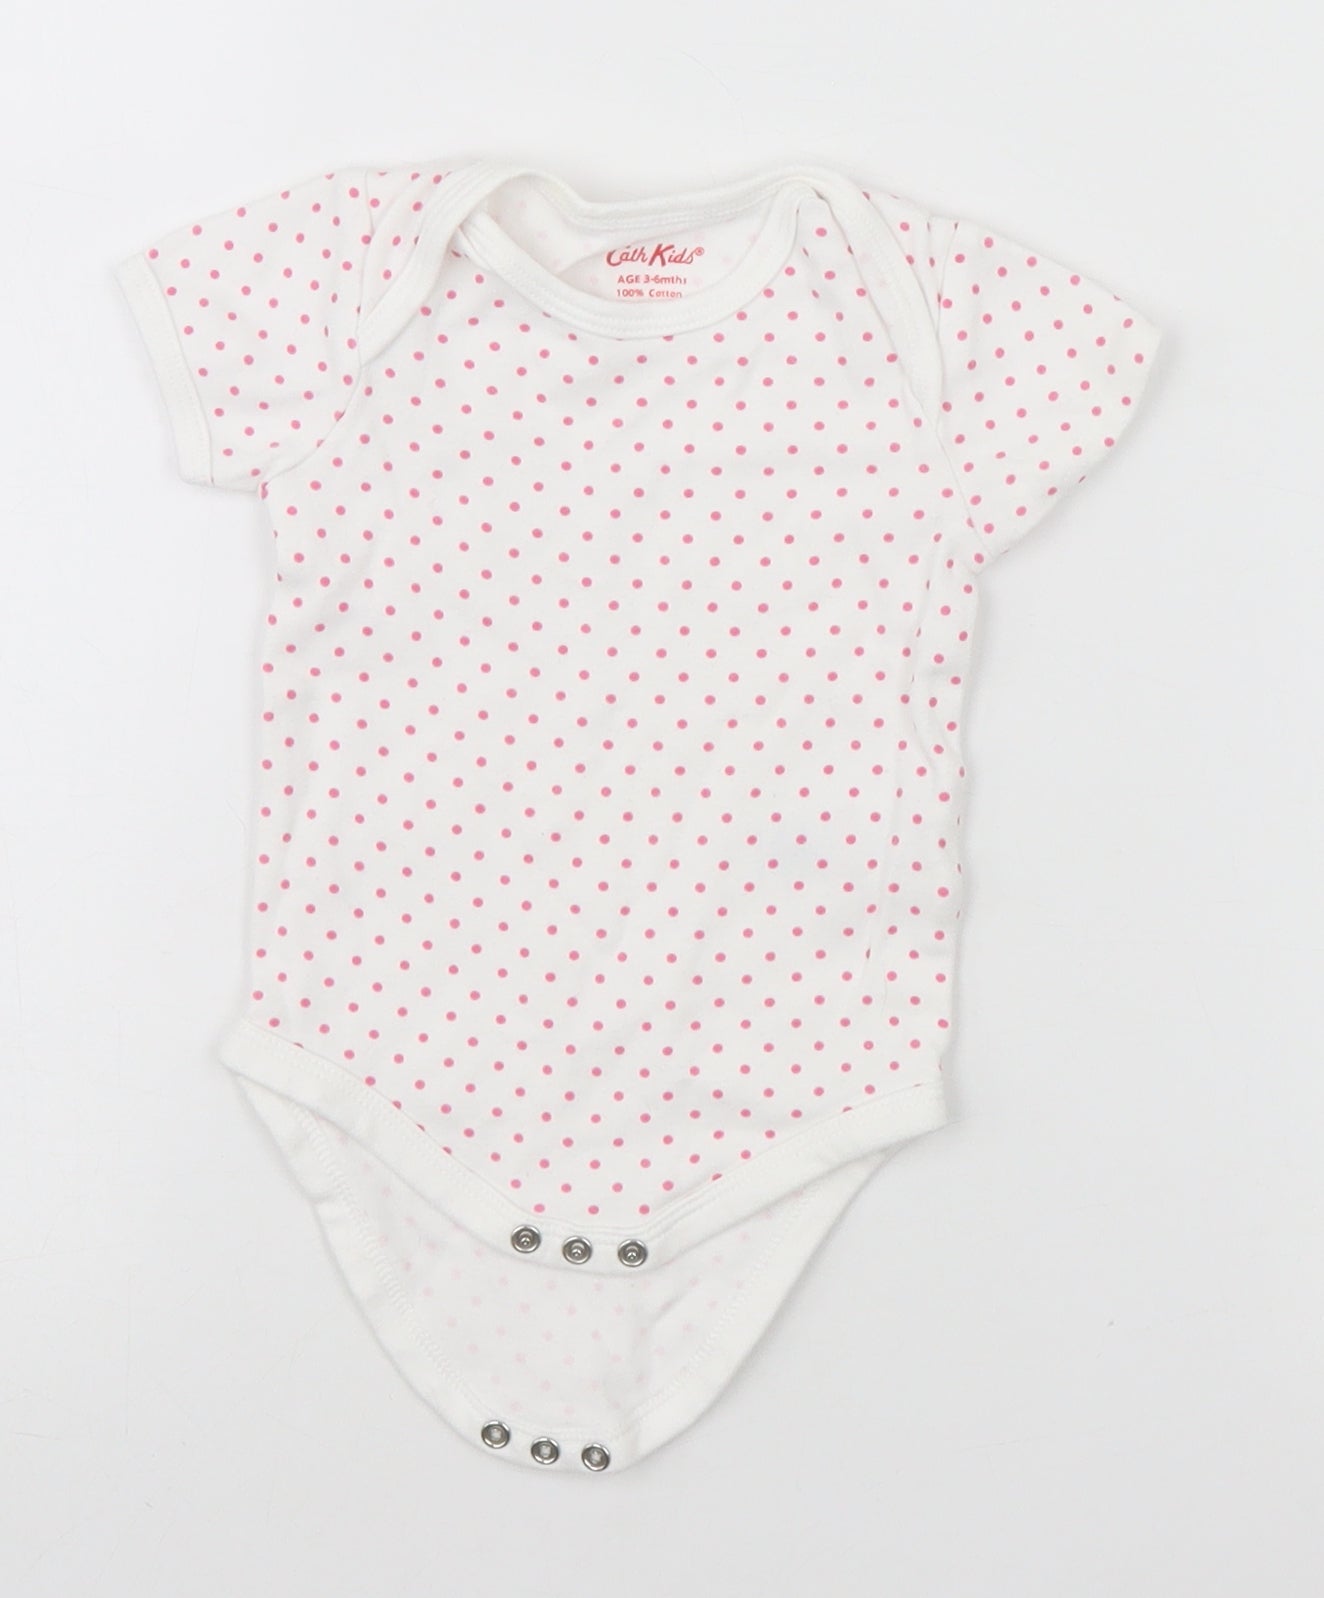 Cath Kidston Baby White Spotted  Babygrow One-Piece Size 3-6 Months